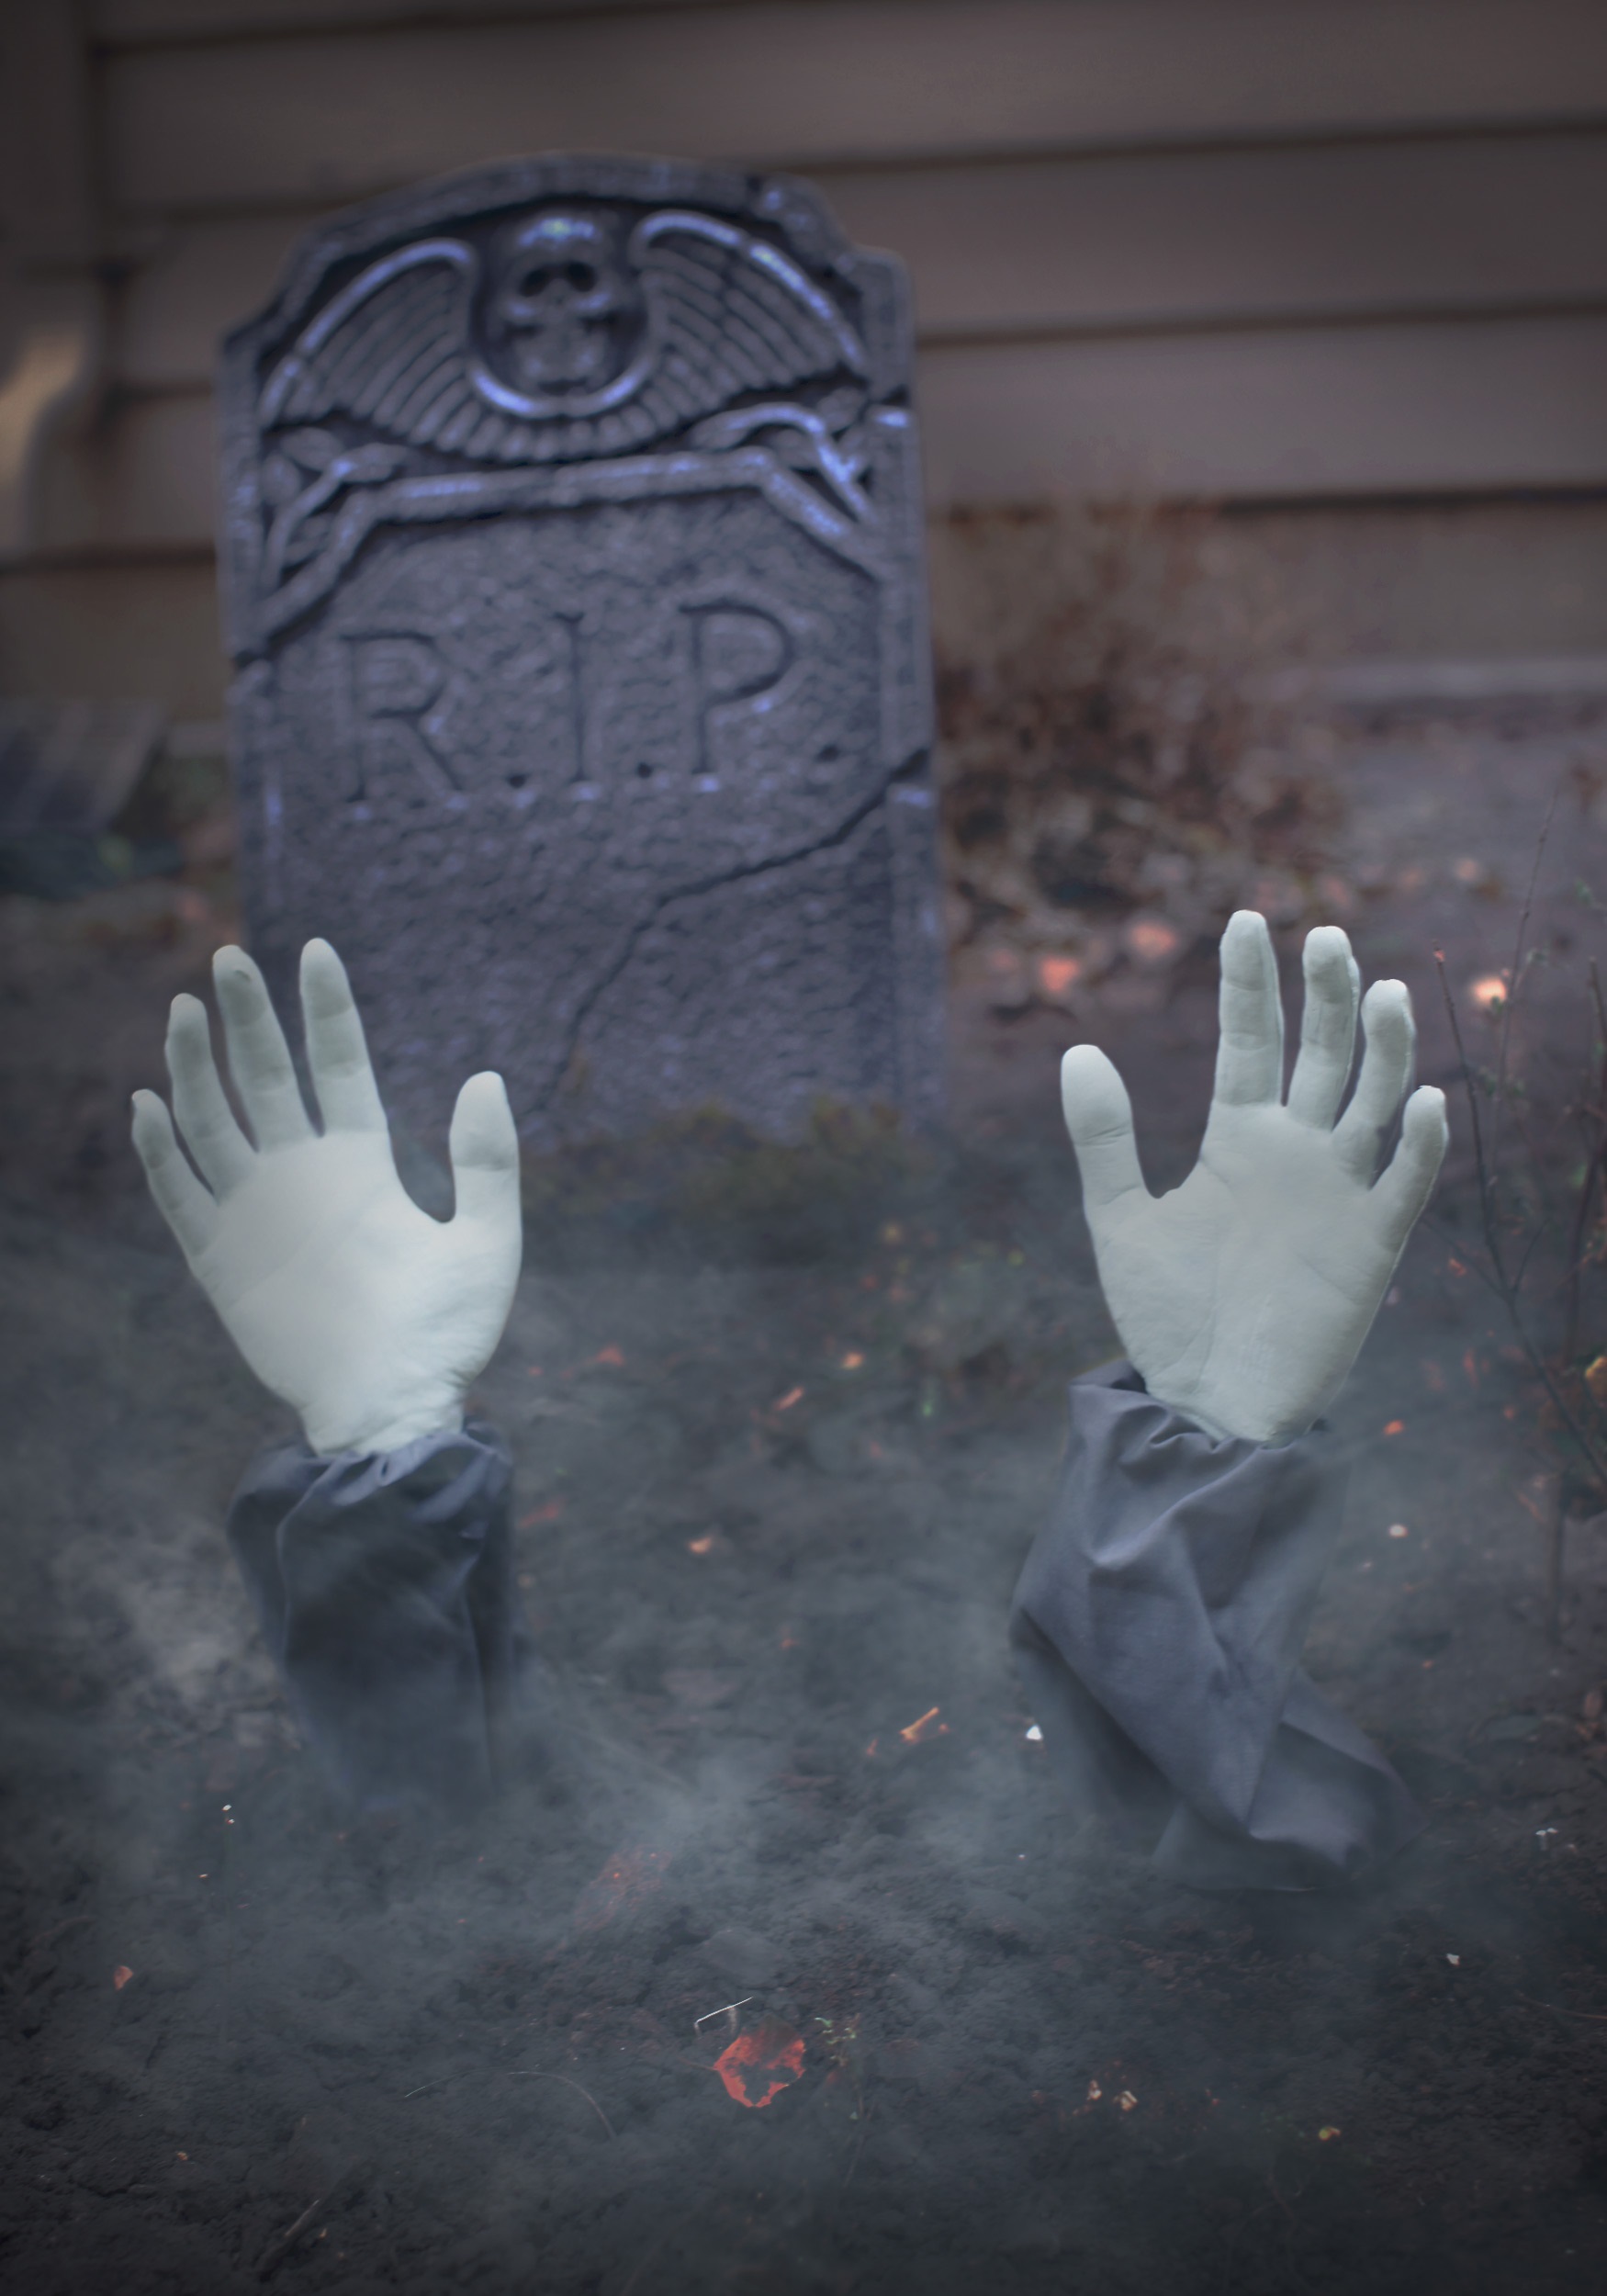 Spooky Zombie Arm Lawn Halloween Outdoor Decoration